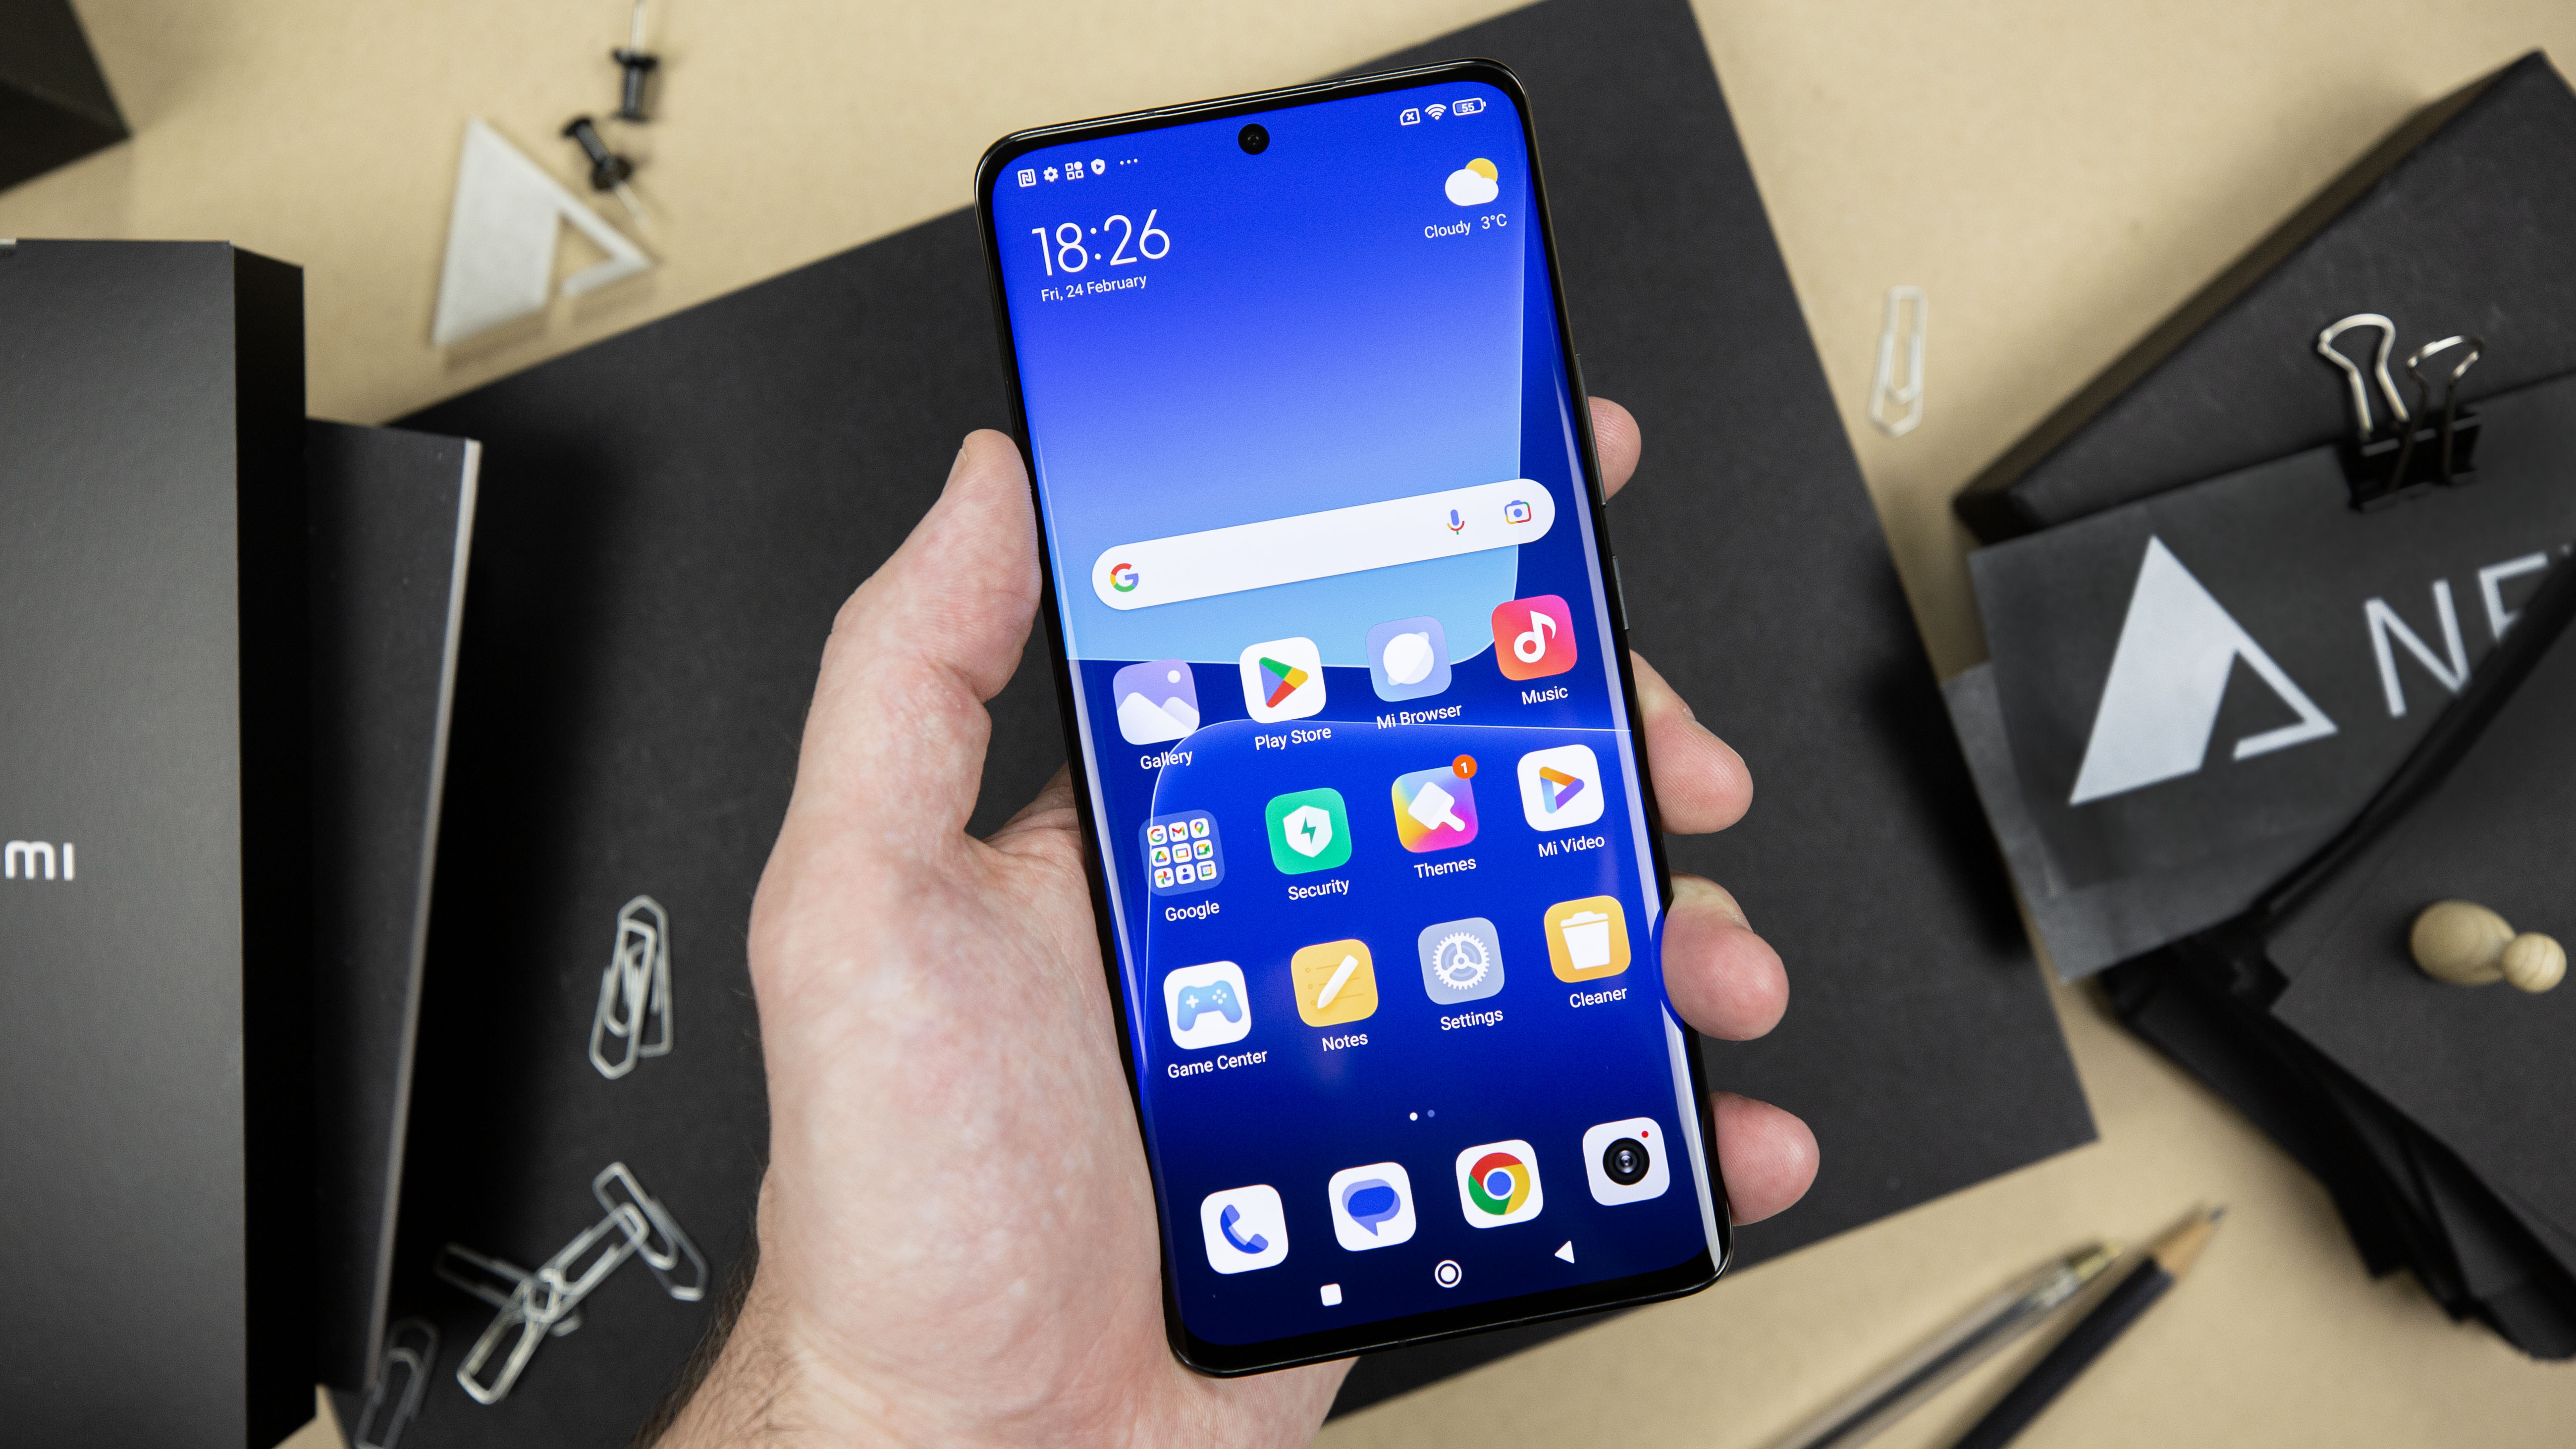 Xiaomi 11T Pro Review: Not Worthy of its Pro Name